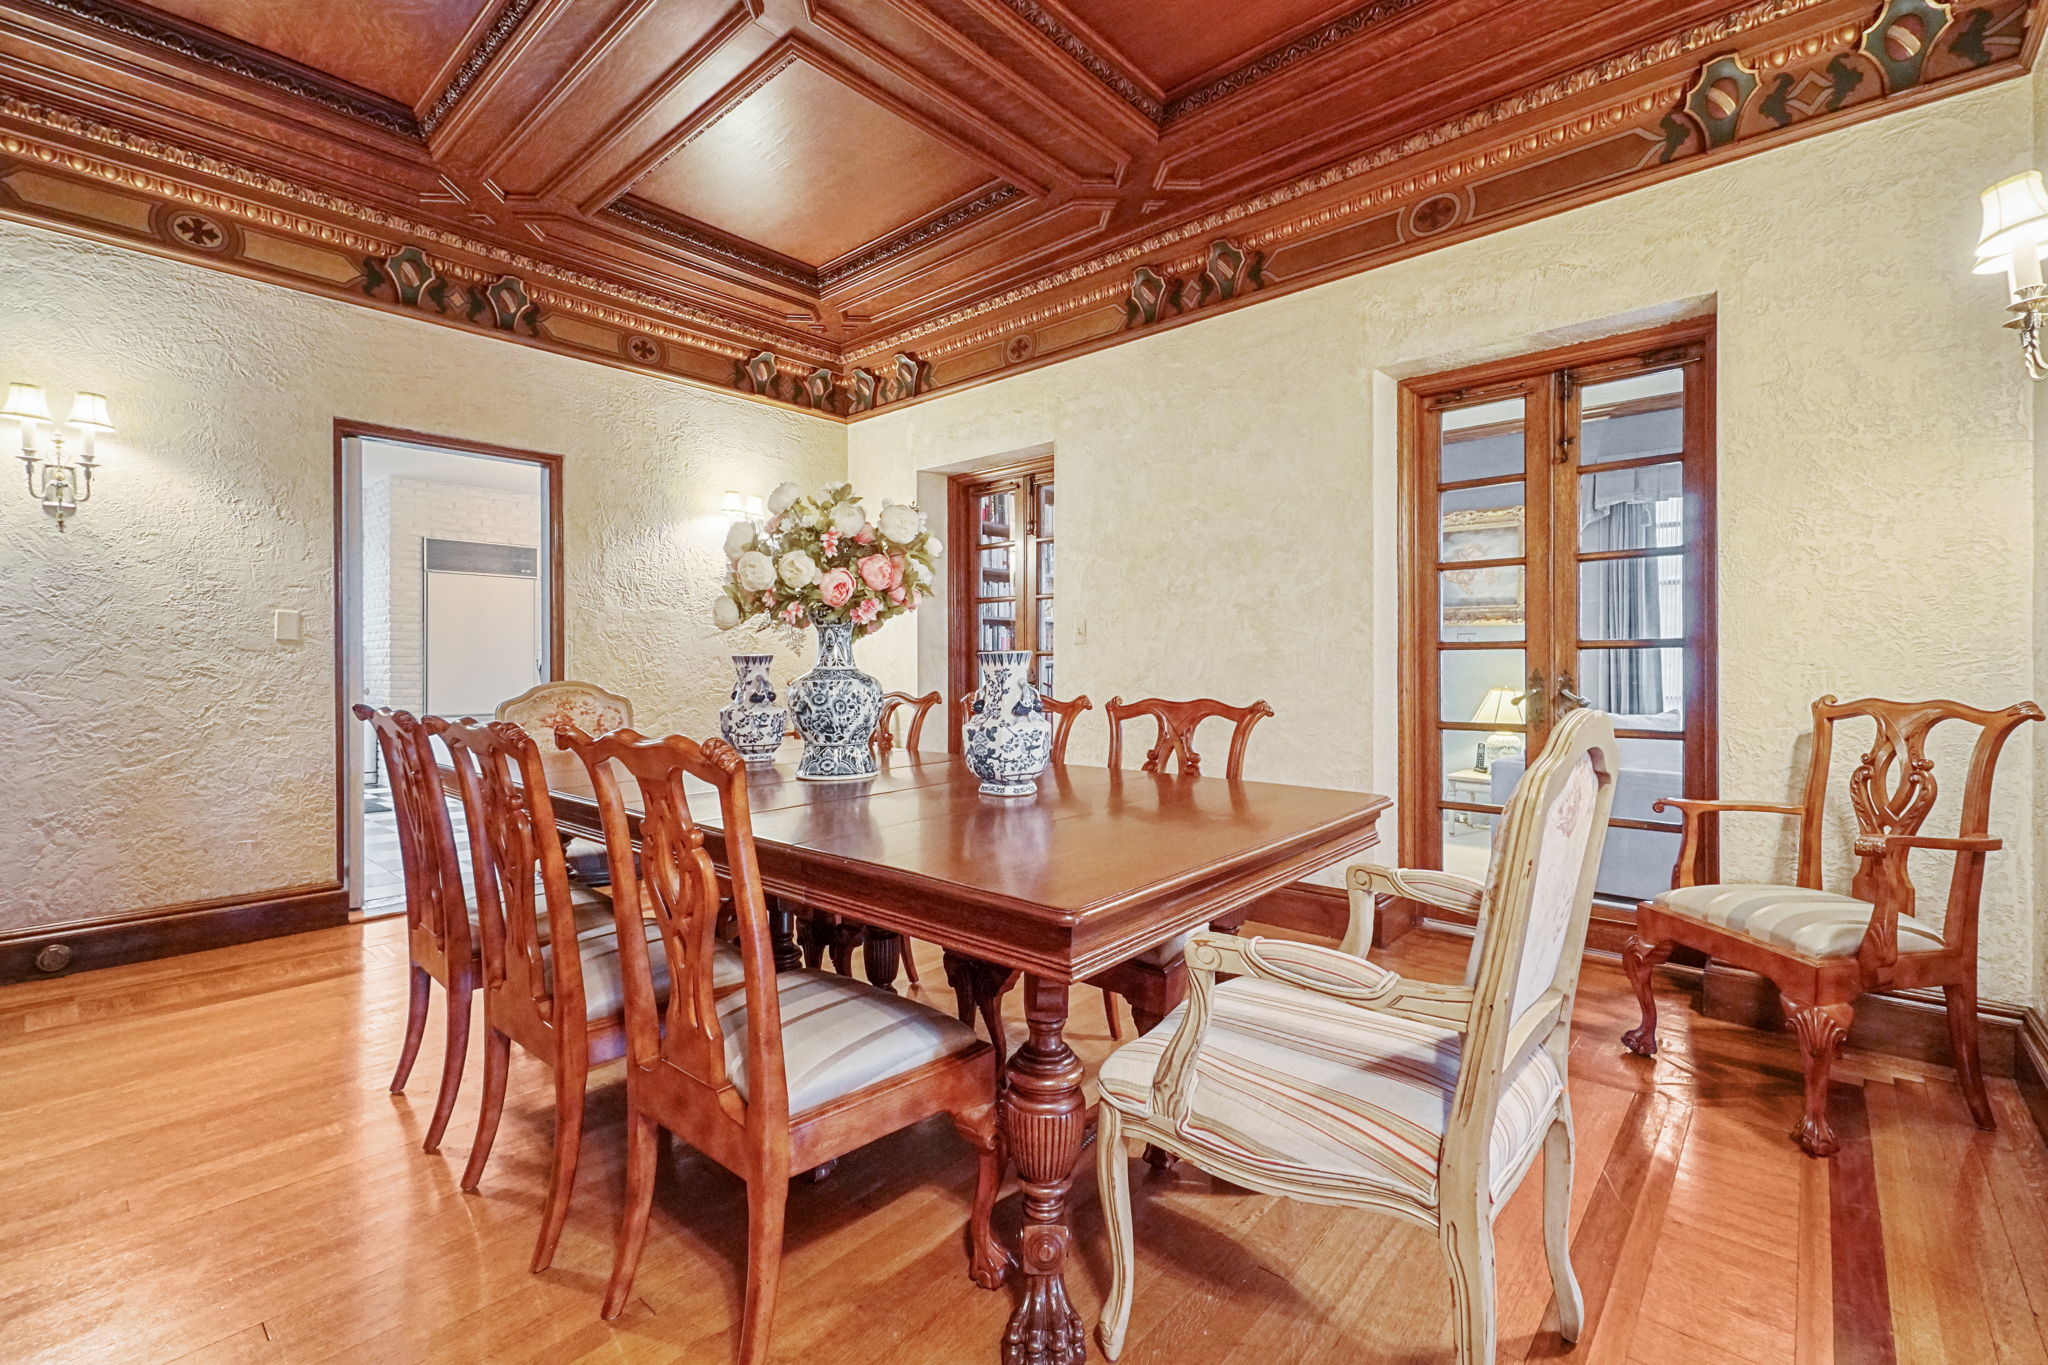 Banquet Sized Dining Room